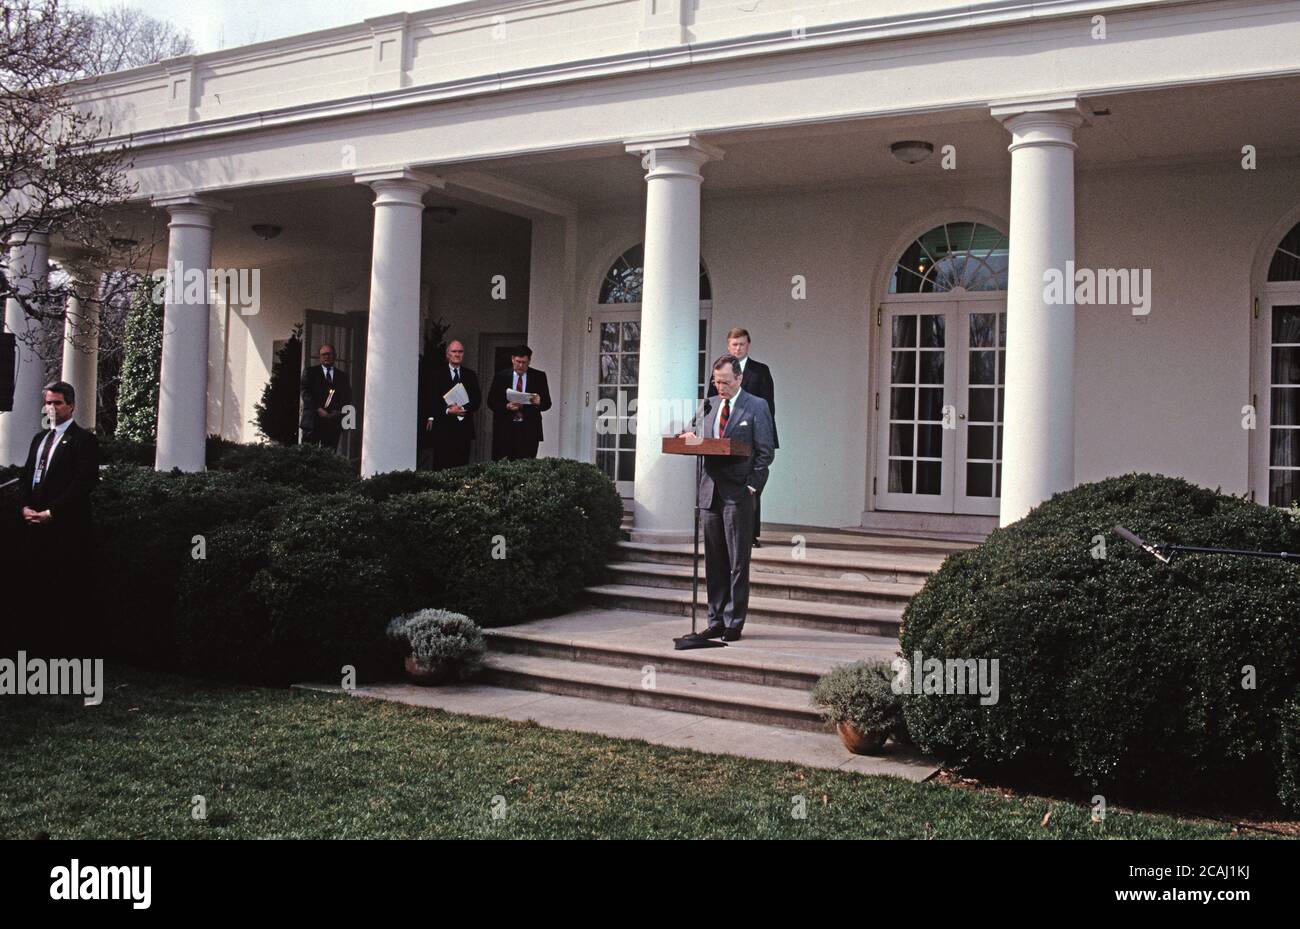 In this file photo, United States President George H.W. Bush reads a statement rejecting the proposed Soviet peace agreement to end the Gulf War with Iraq in the Rose Garden of the White House in Washington, DC on February 22, 1991. Also visible in the photo are White House Press Secretary Marlin Fitzwater, National Security Advisor Brent Scowcroft, White House Chief of Staff John Sununu, and U.S. Vice President Dan Quayle.Credit: Howard L. Sachs/CNP | usage worldwide Stock Photo